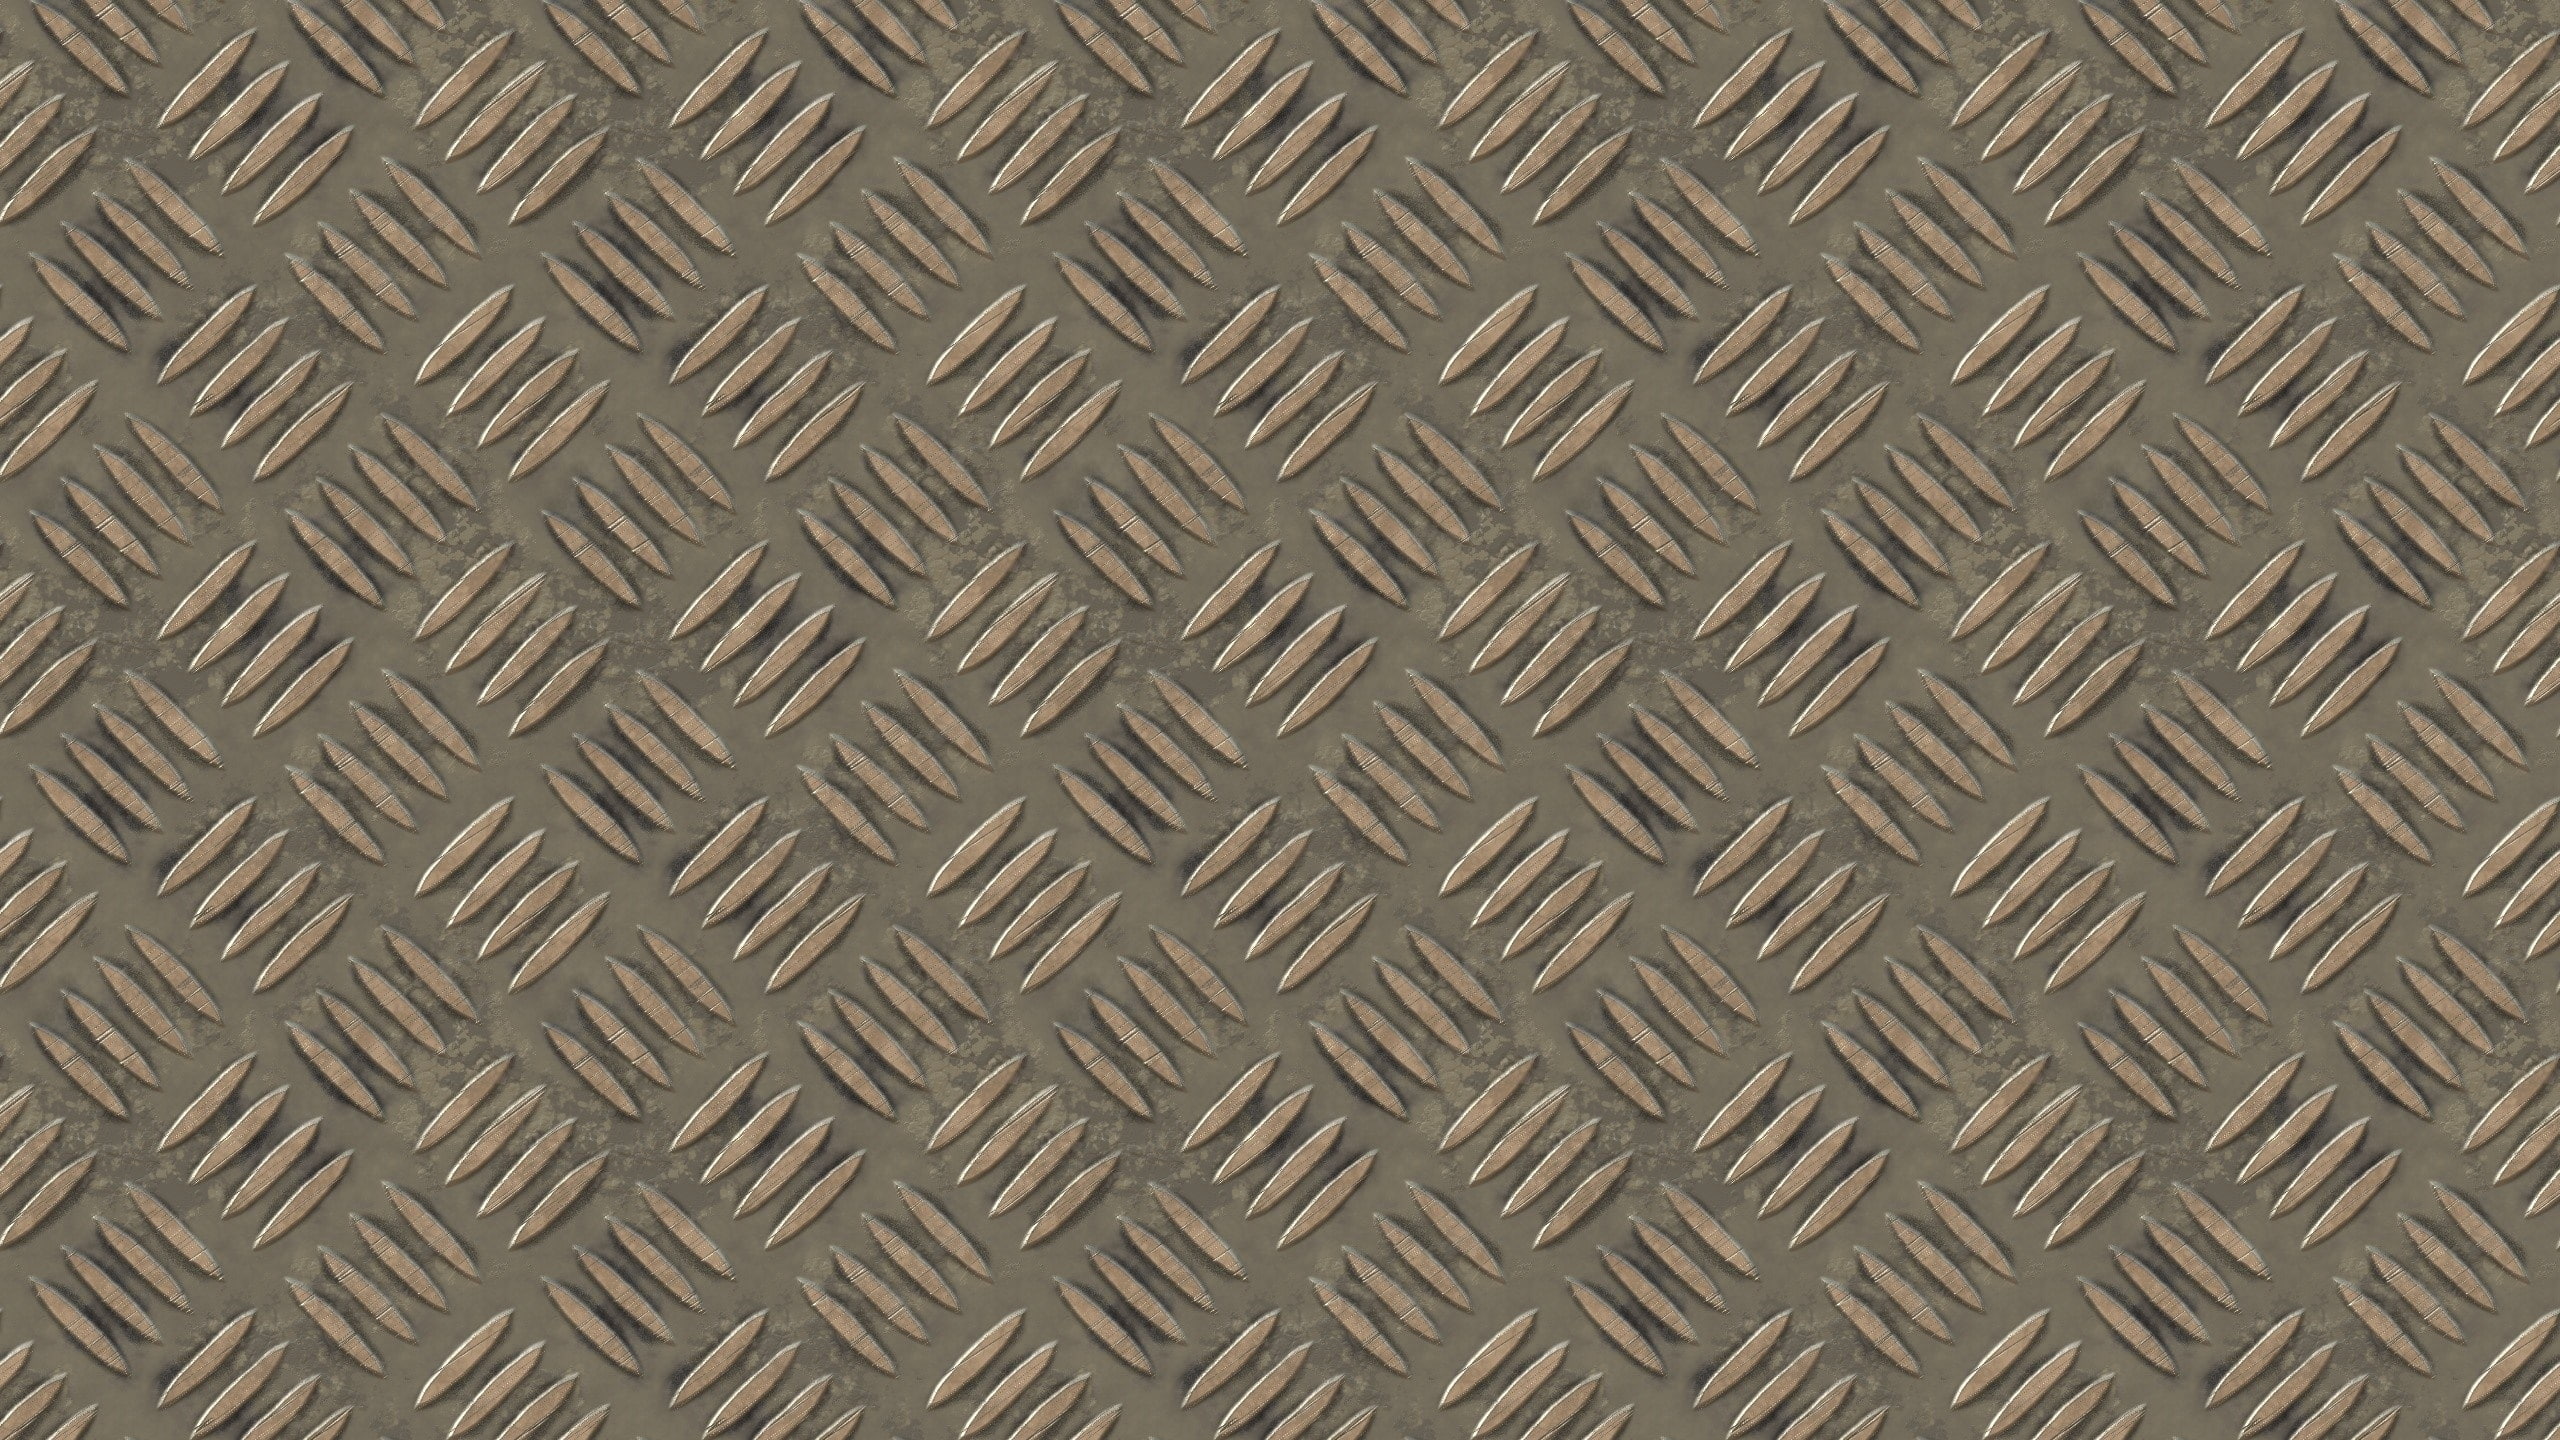 surface, line, metal, sheet, background, texture, perforation